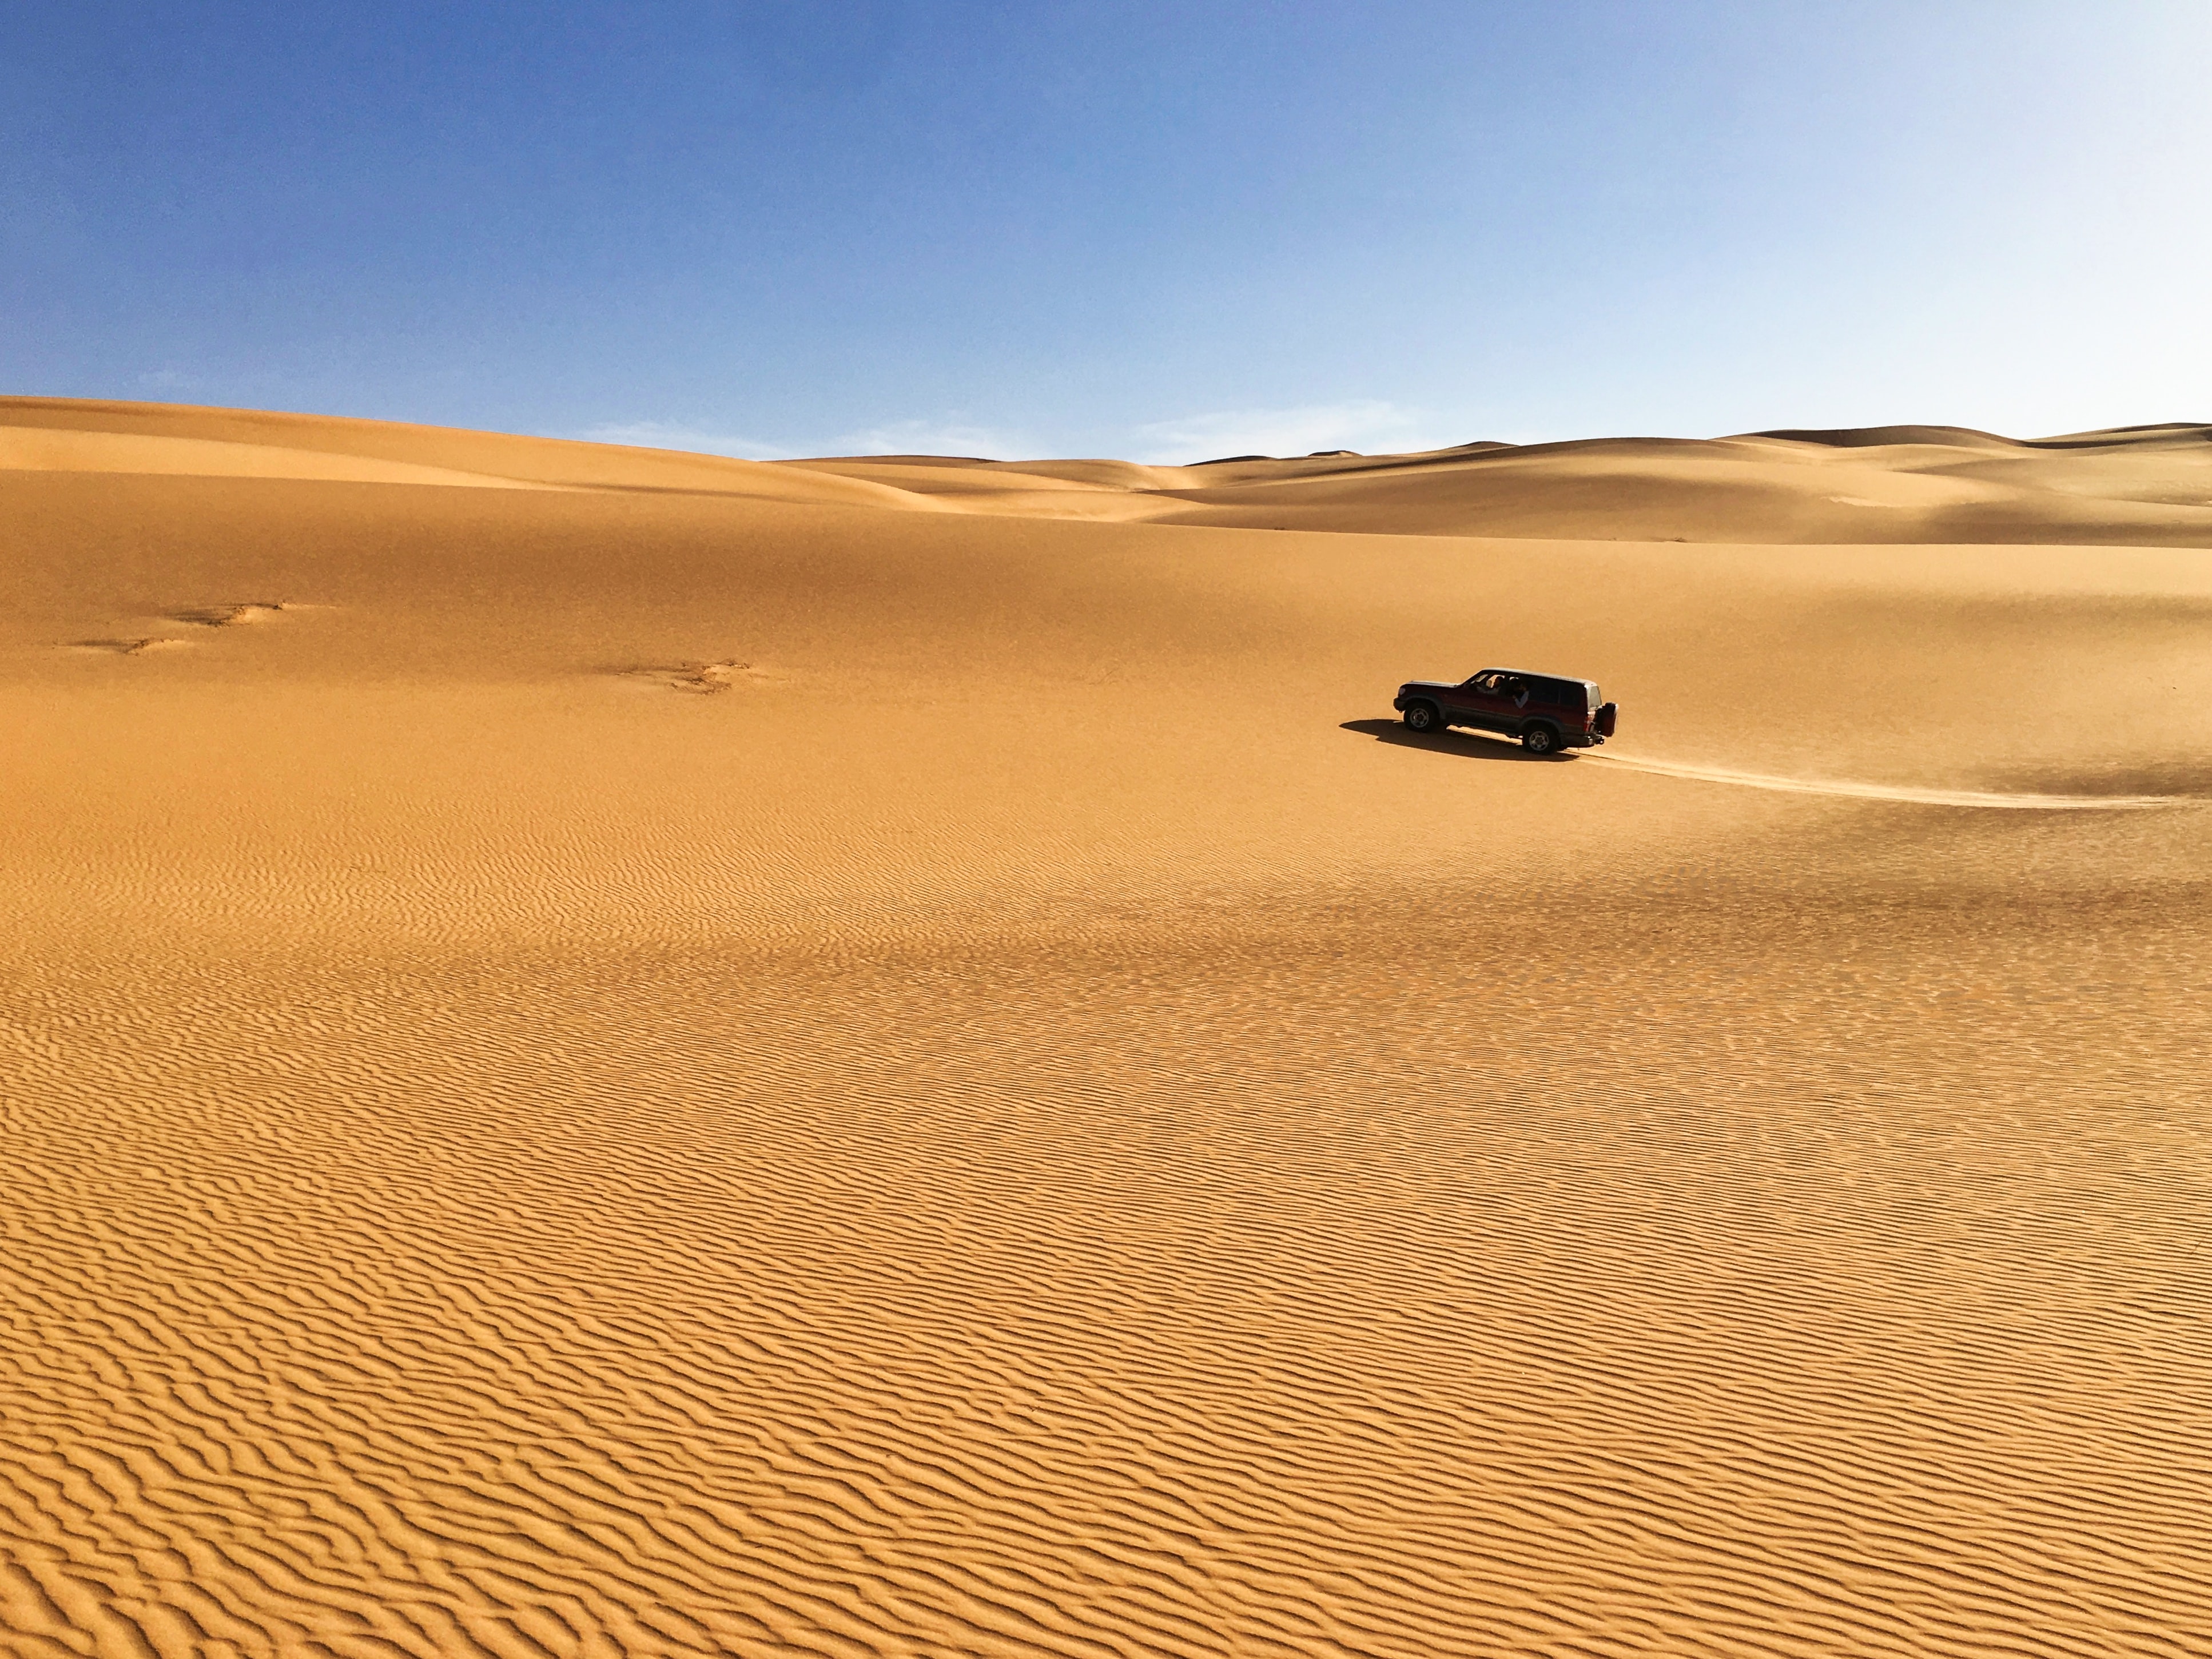 sand, desert, cars, car, jeep, machine, traces lock screen backgrounds